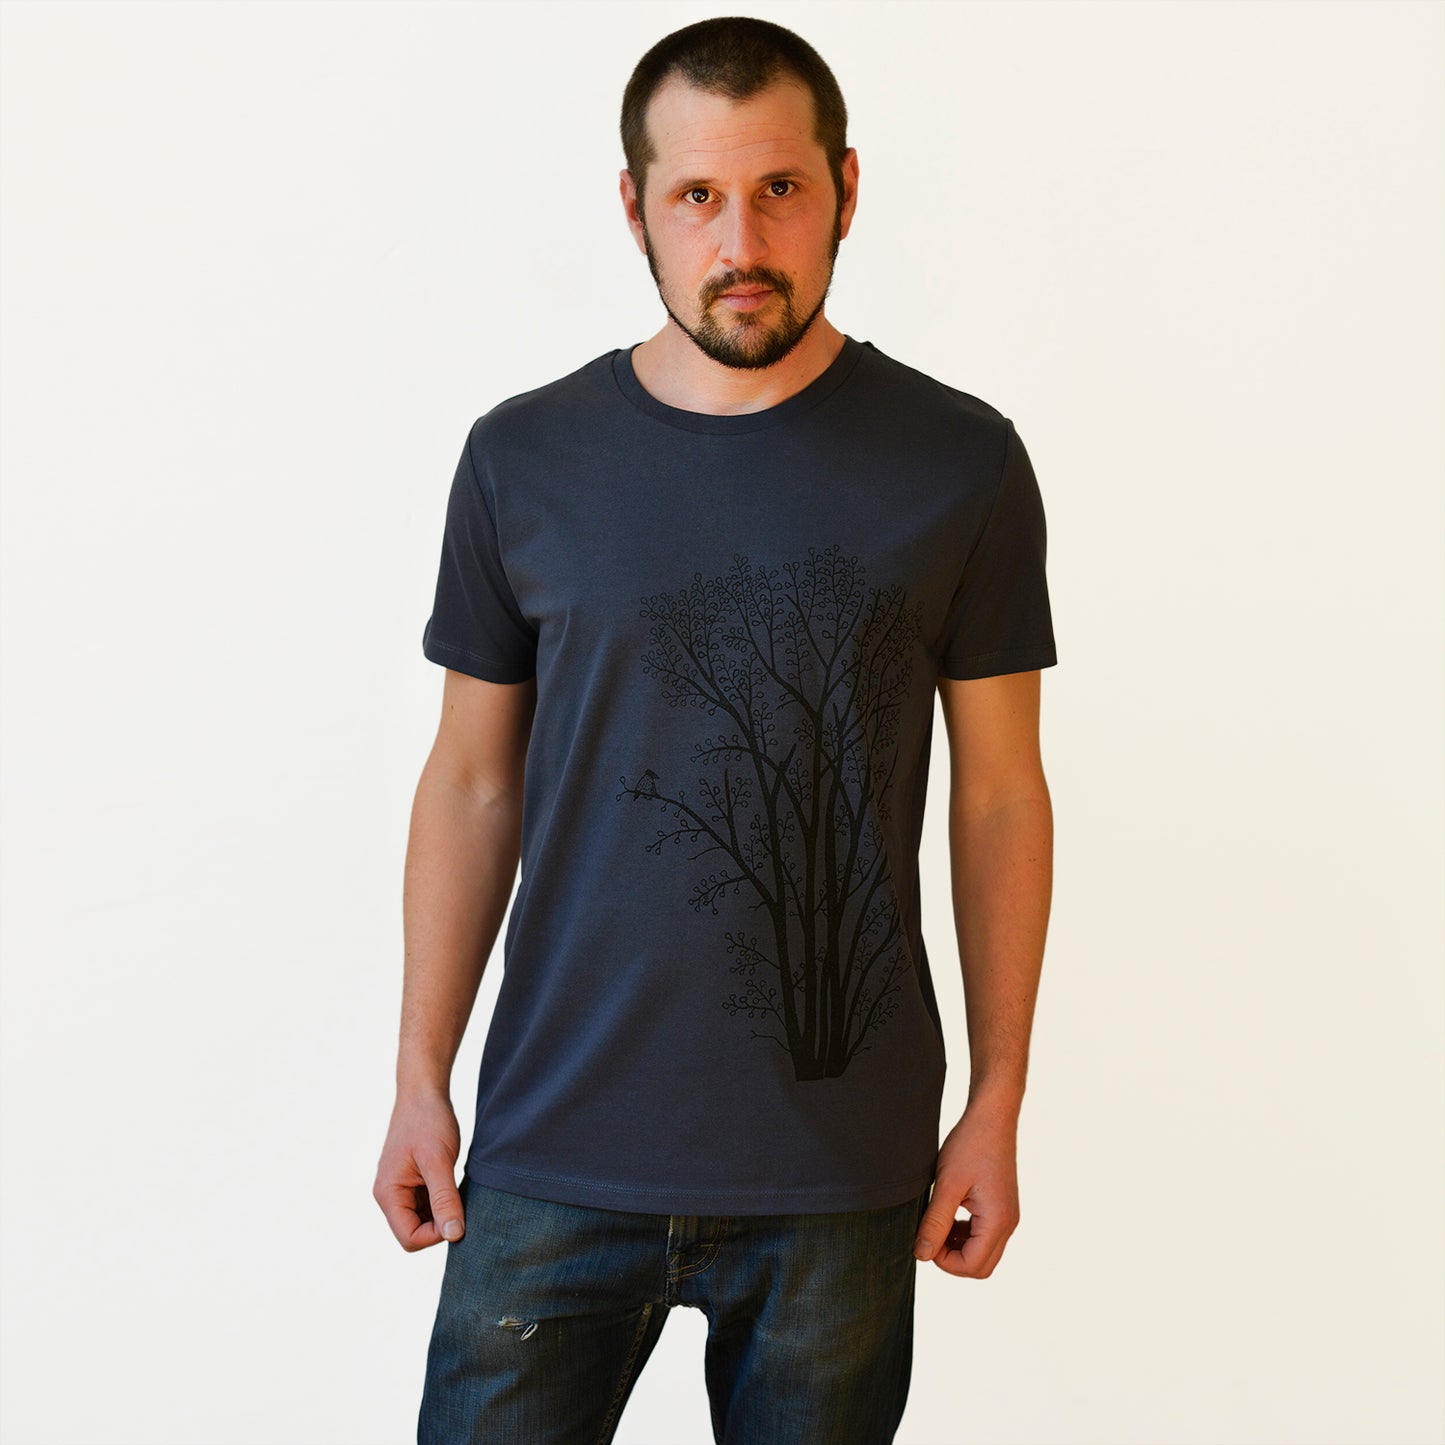 Erle mit Elster T-Shirt in india ink grey XS-XL